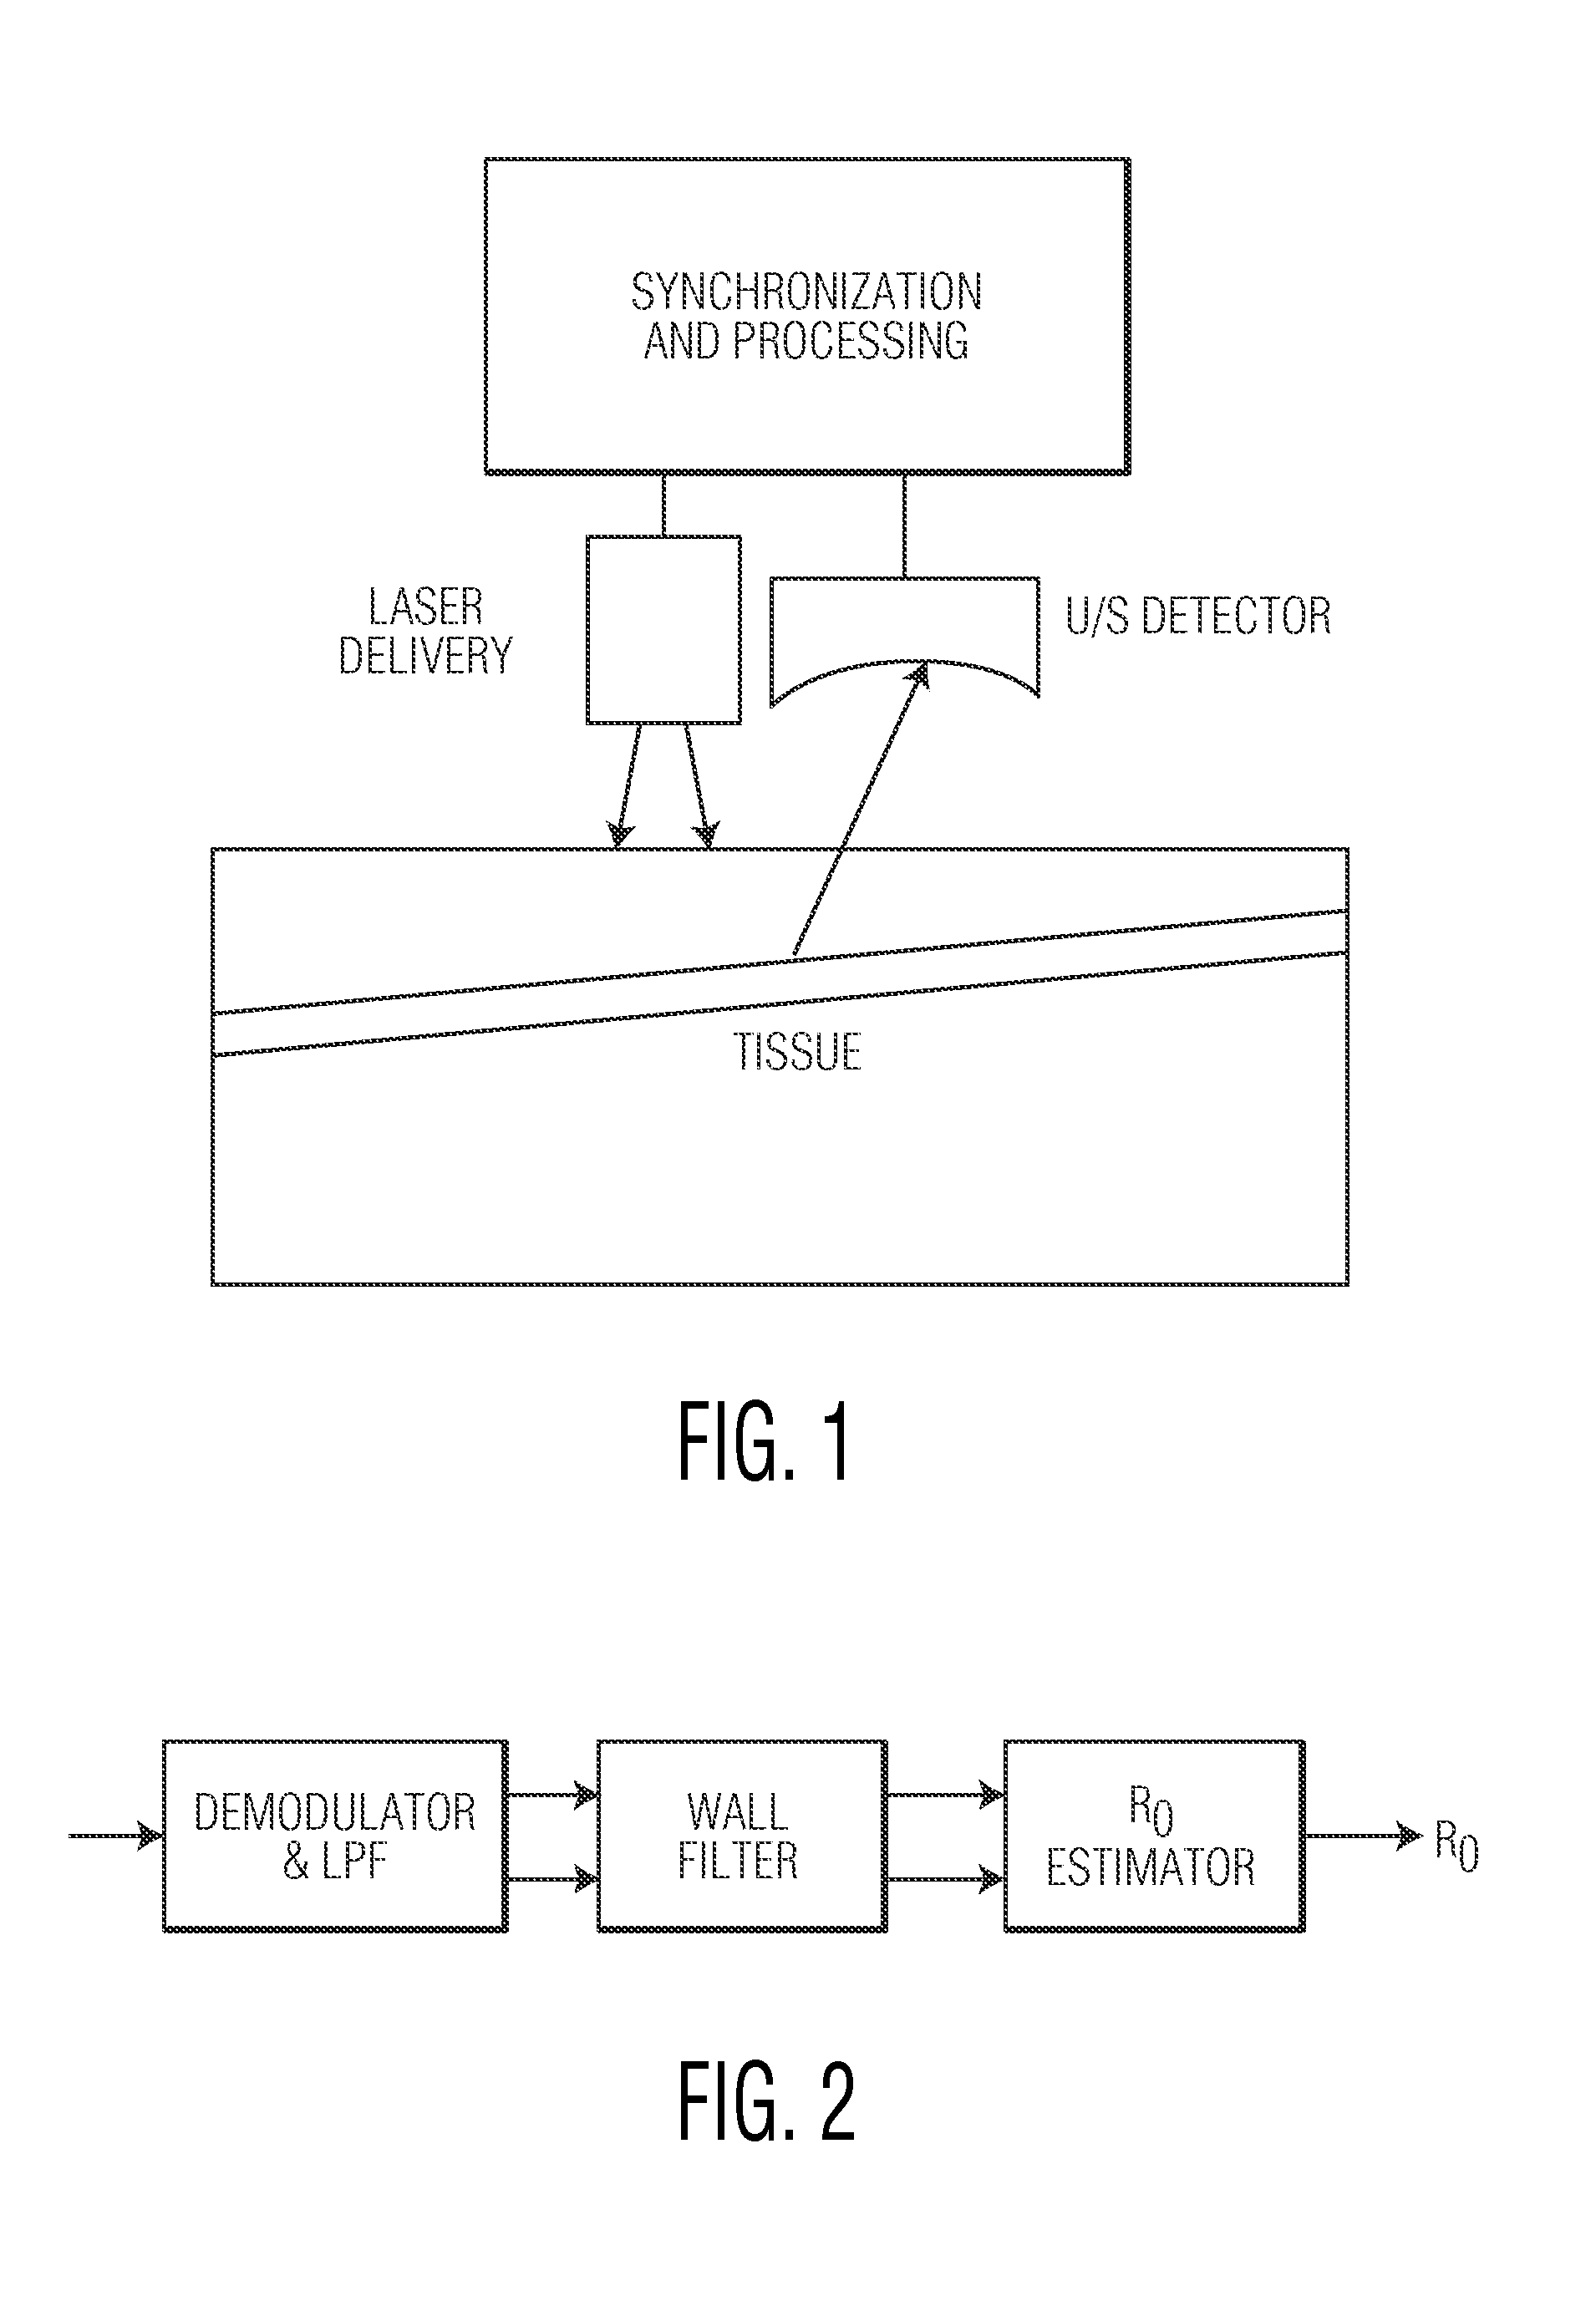 Systems and methods for detecting flow and enhancing snr performance in photoacoustic imaging applications